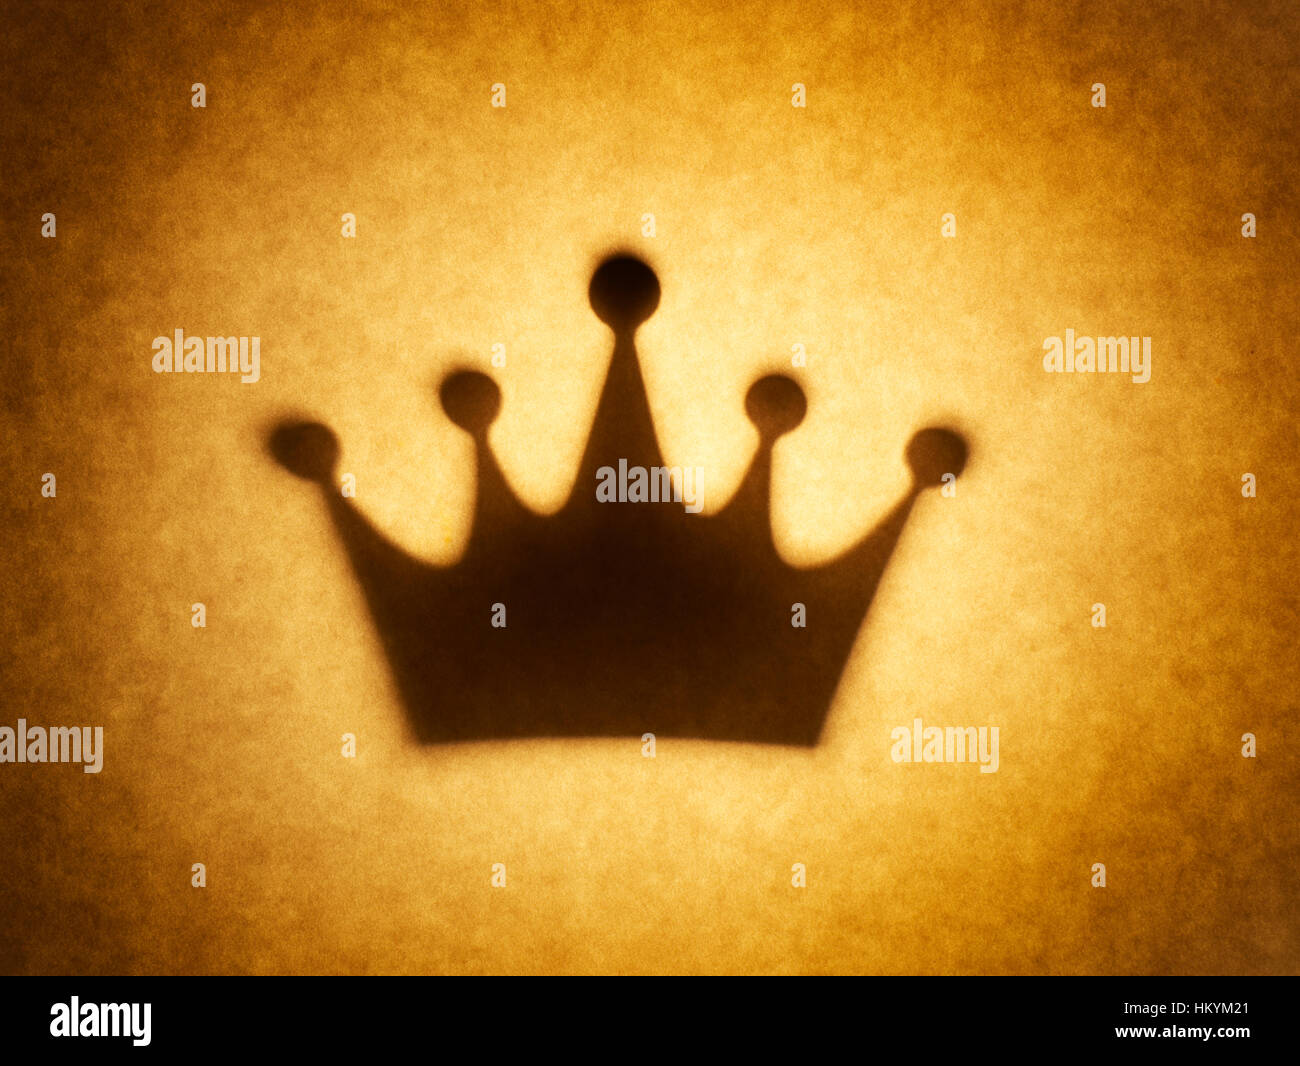 Backlit silhouette of crown shape cut out against brown tone paper, with spot highlight. Stock Photo